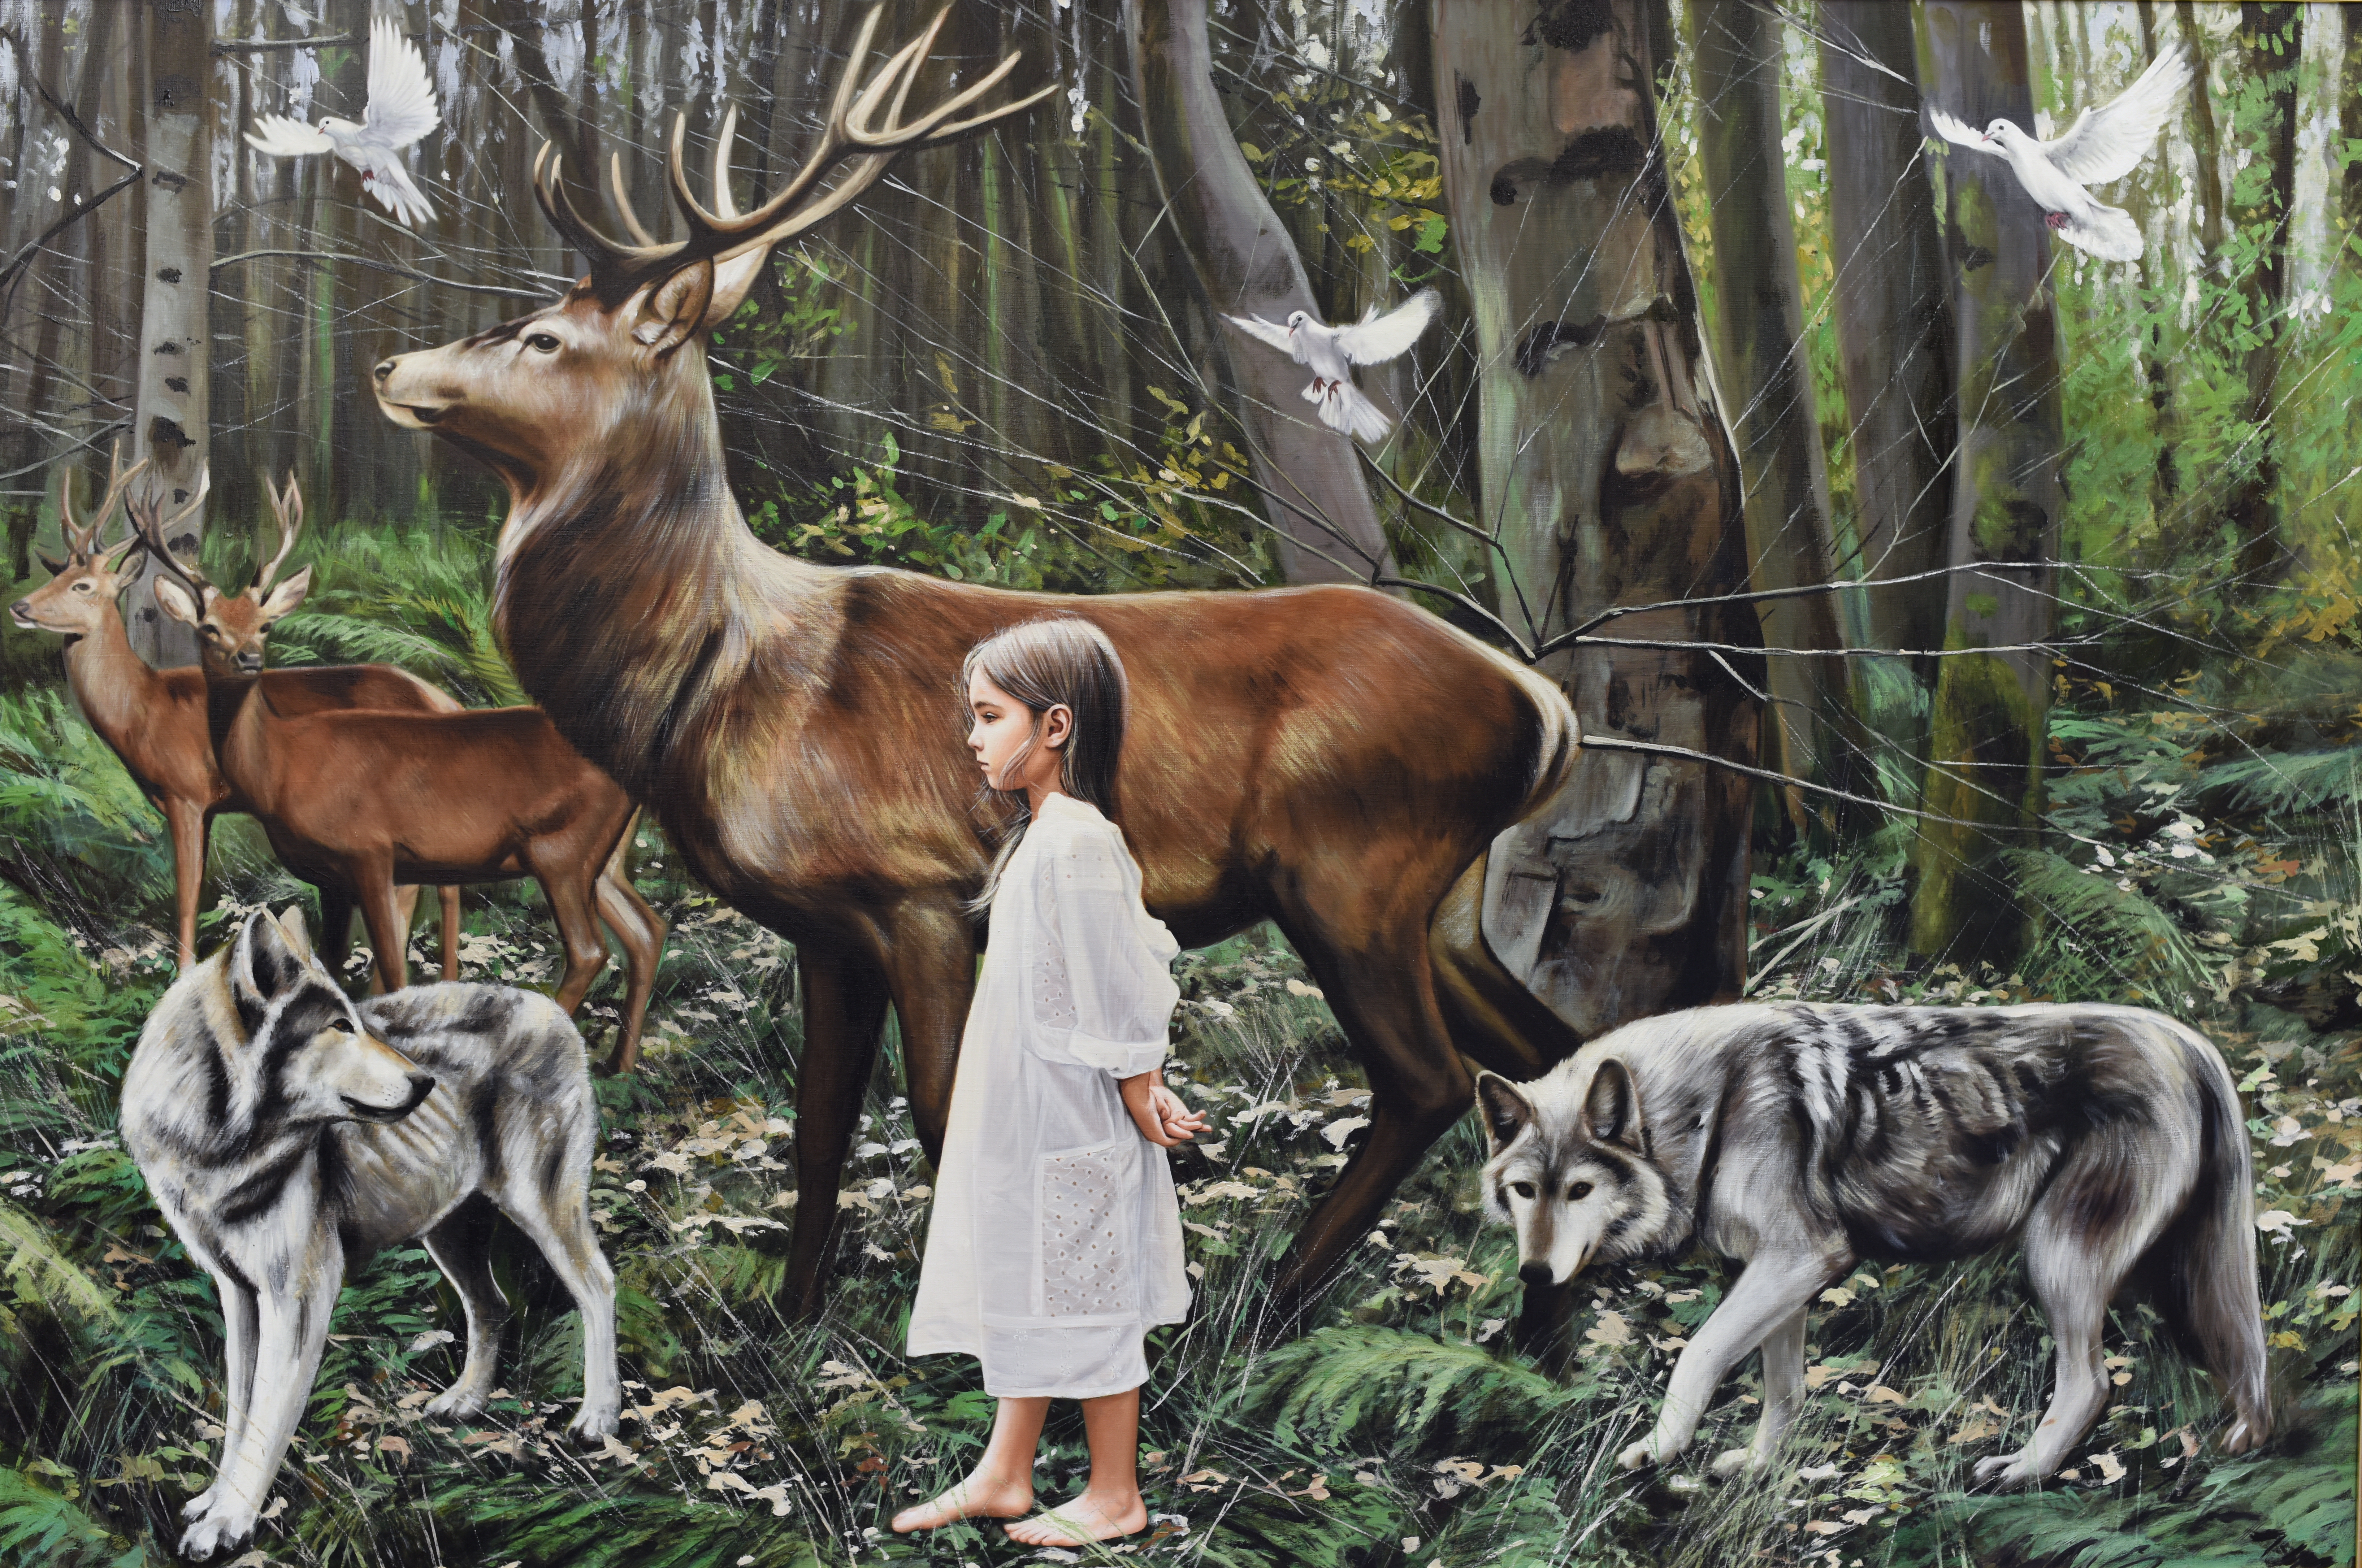 Child of the Forest 4’ x 6’